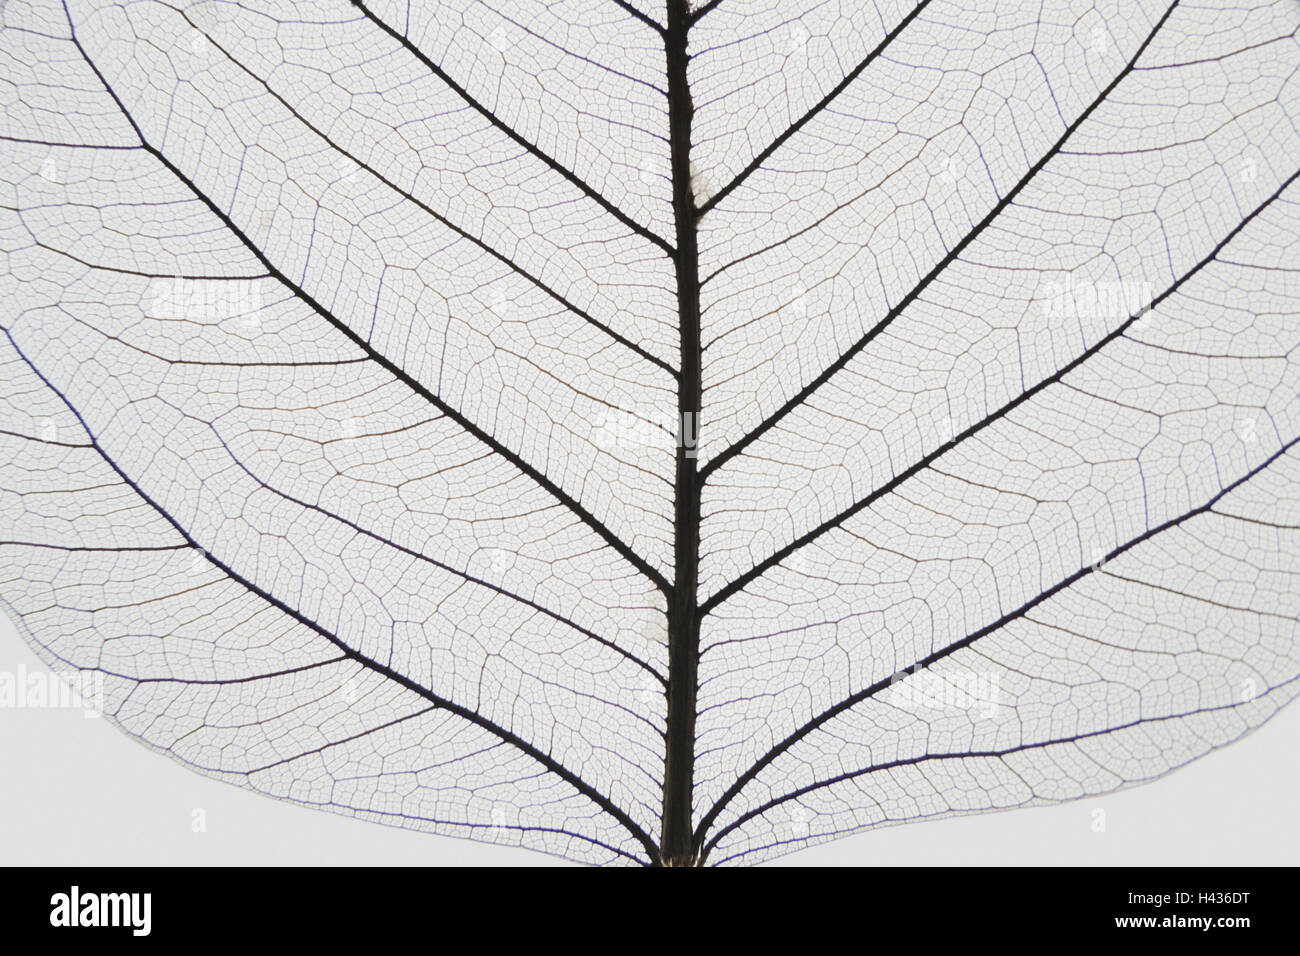 Poplar fig, leaves, structure, conductors, form, silhouette, heart, wisdom, foliage, product photography, veins, dryly, plant, leaf veins, detail, autumn, dries up, leaf structure, sample, heart form, heart-shaped, Buddha's tree, transmitted light, cut out, conception, uncolored, filigree, Stock Photo